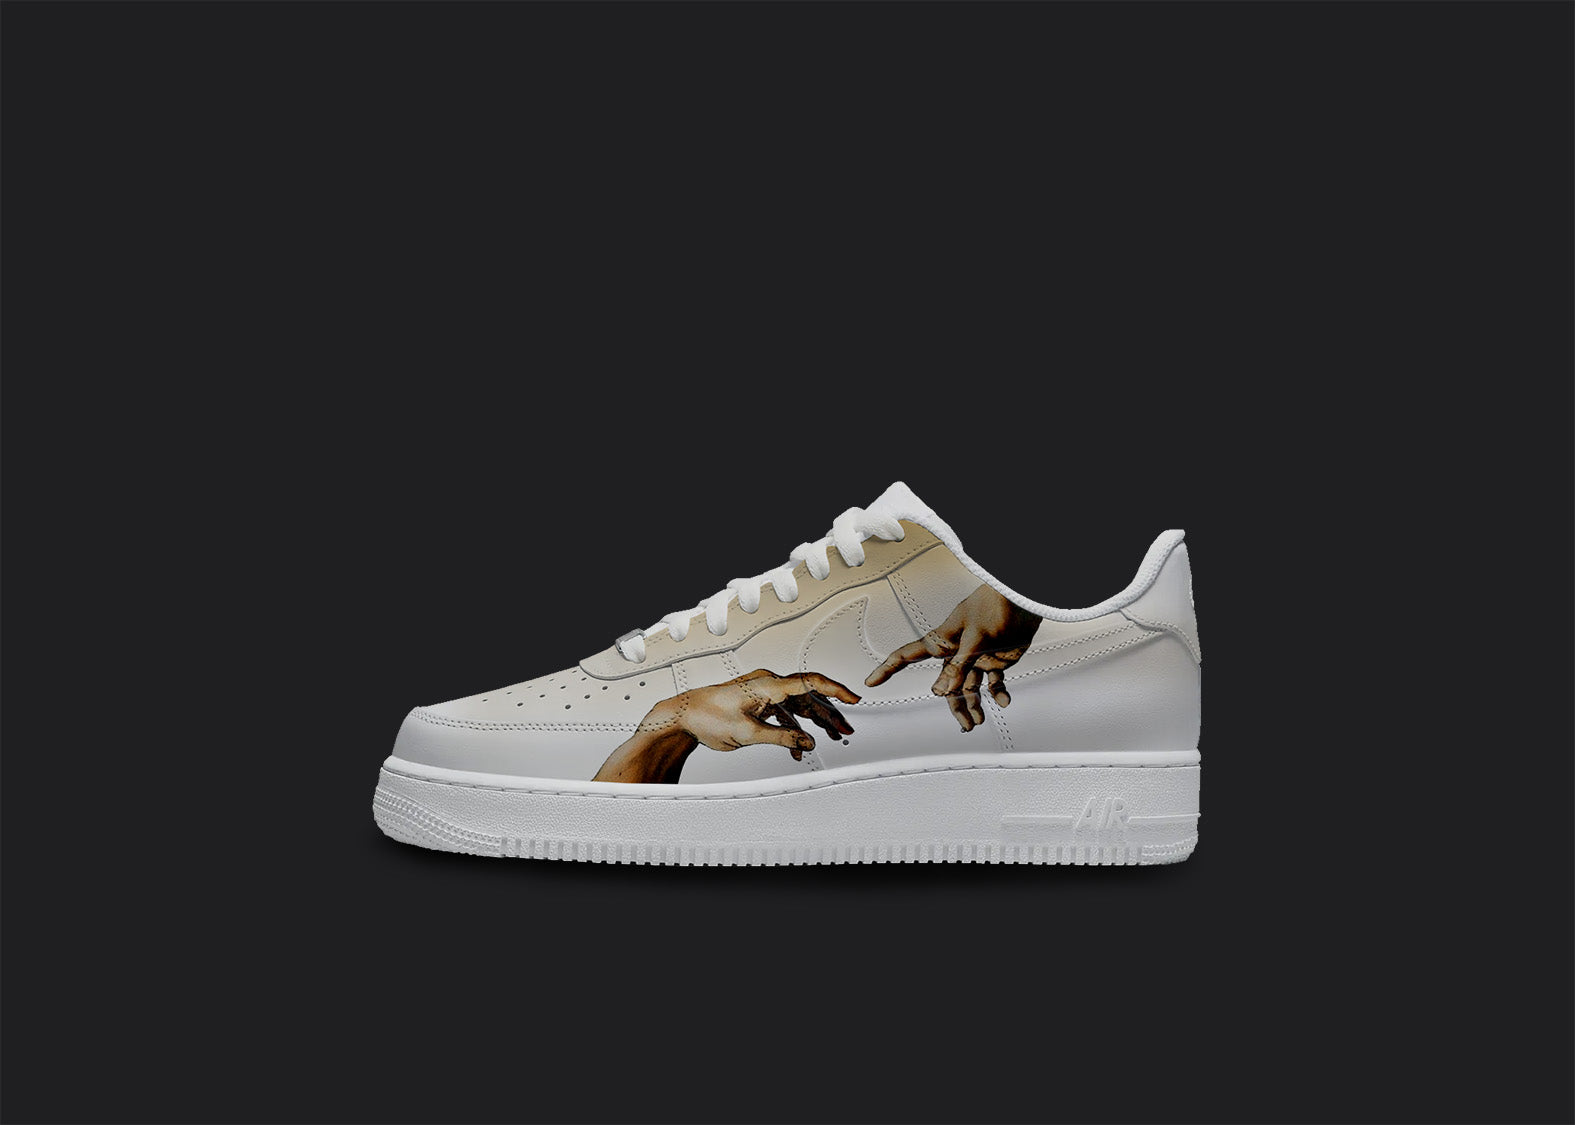 The image is of a Custom Nike Air force 1 sneaker on a blank black background. The white custom sneaker has a creation of adams hands design on the outside of the sneaker.